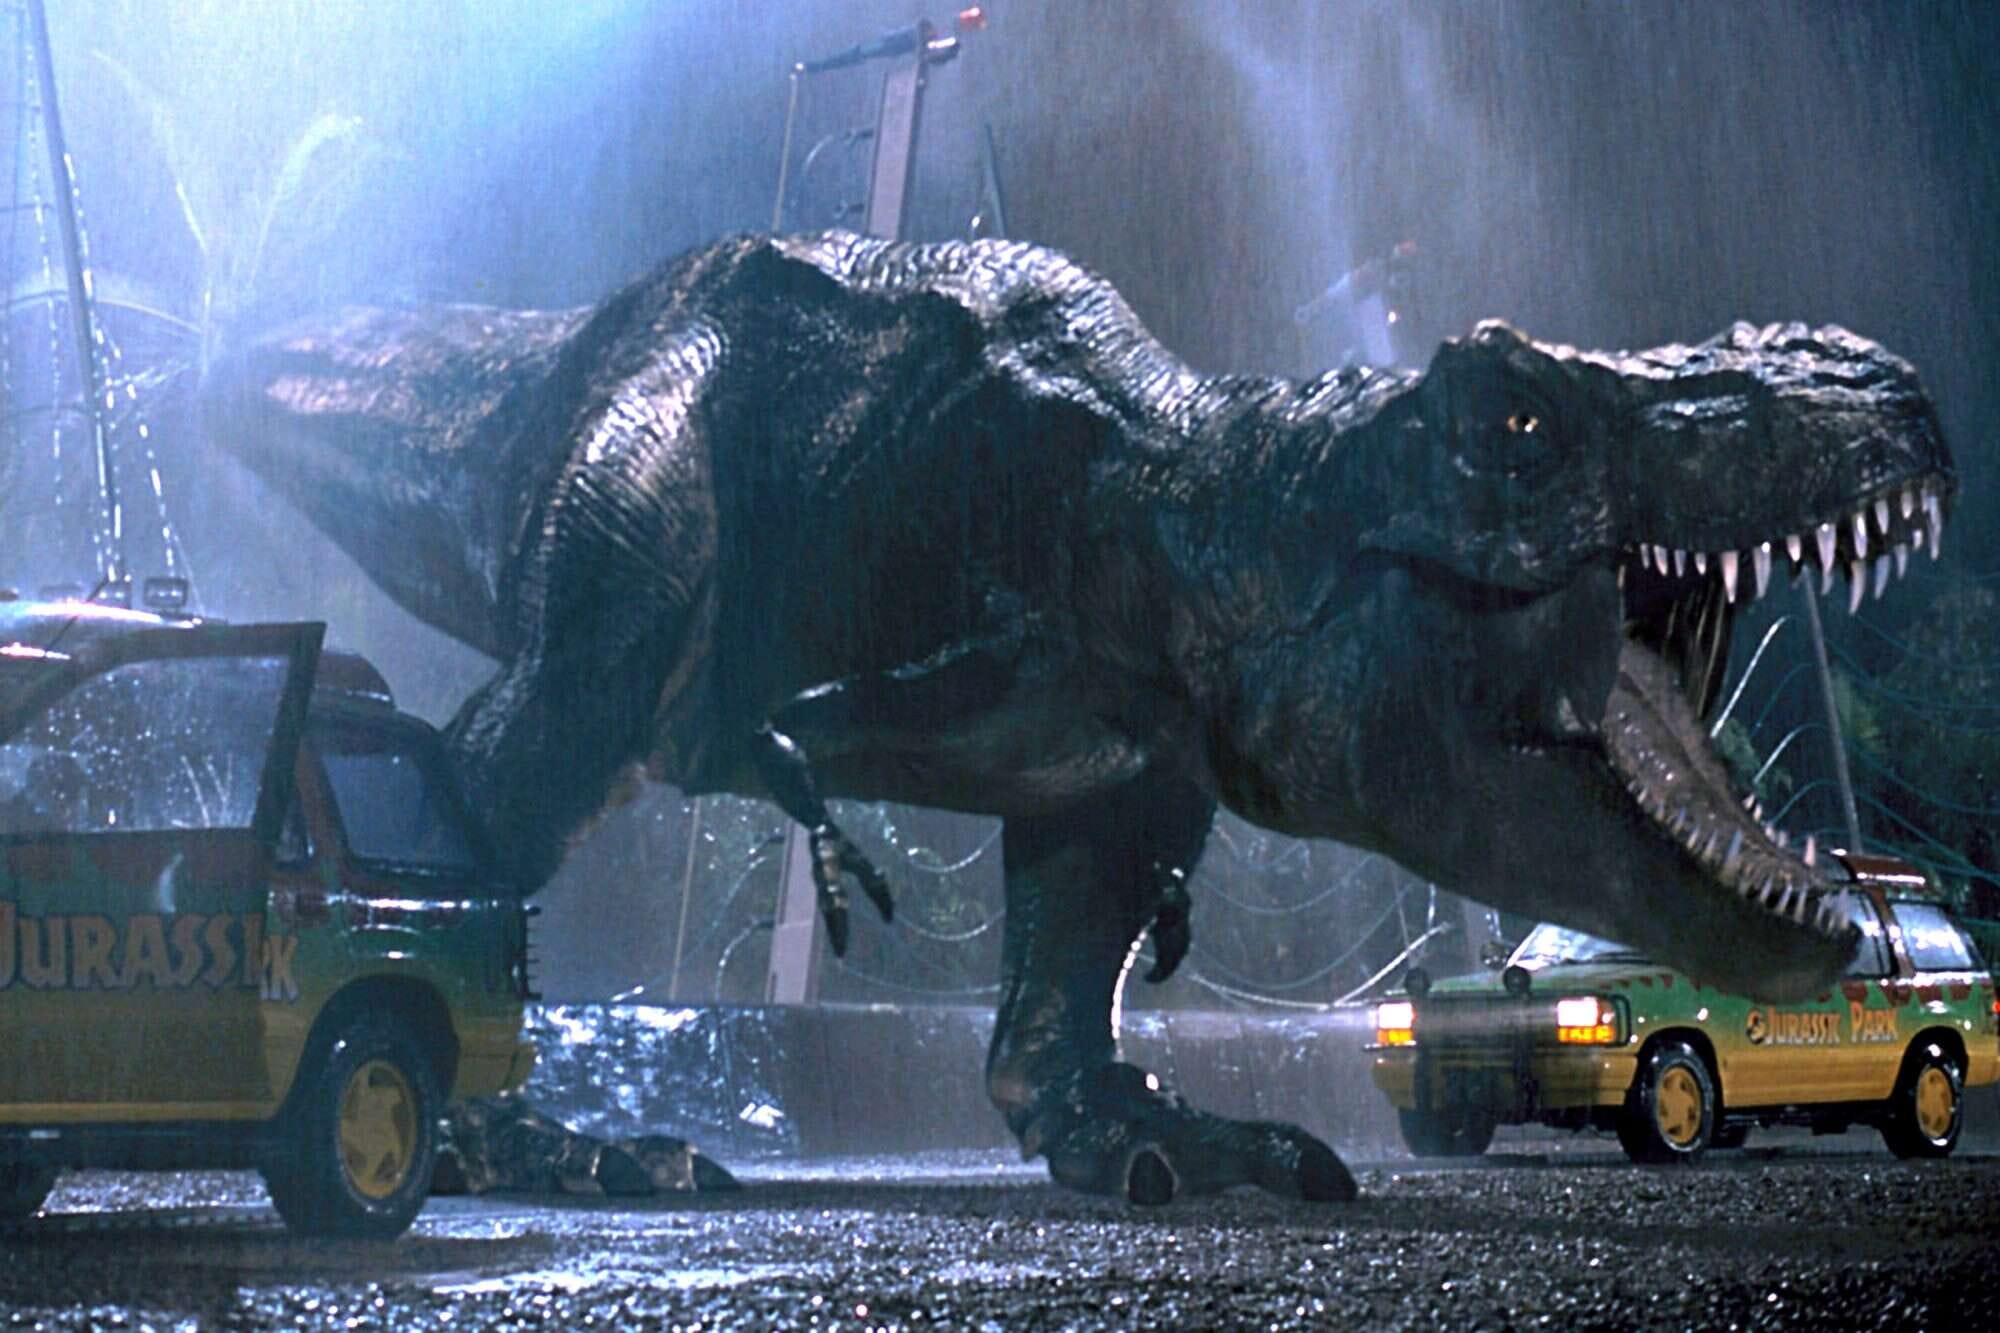 How Jurassic Park’s Amazing Dinosaurs Kickstarted a New Era for Hollywood Blockbusters